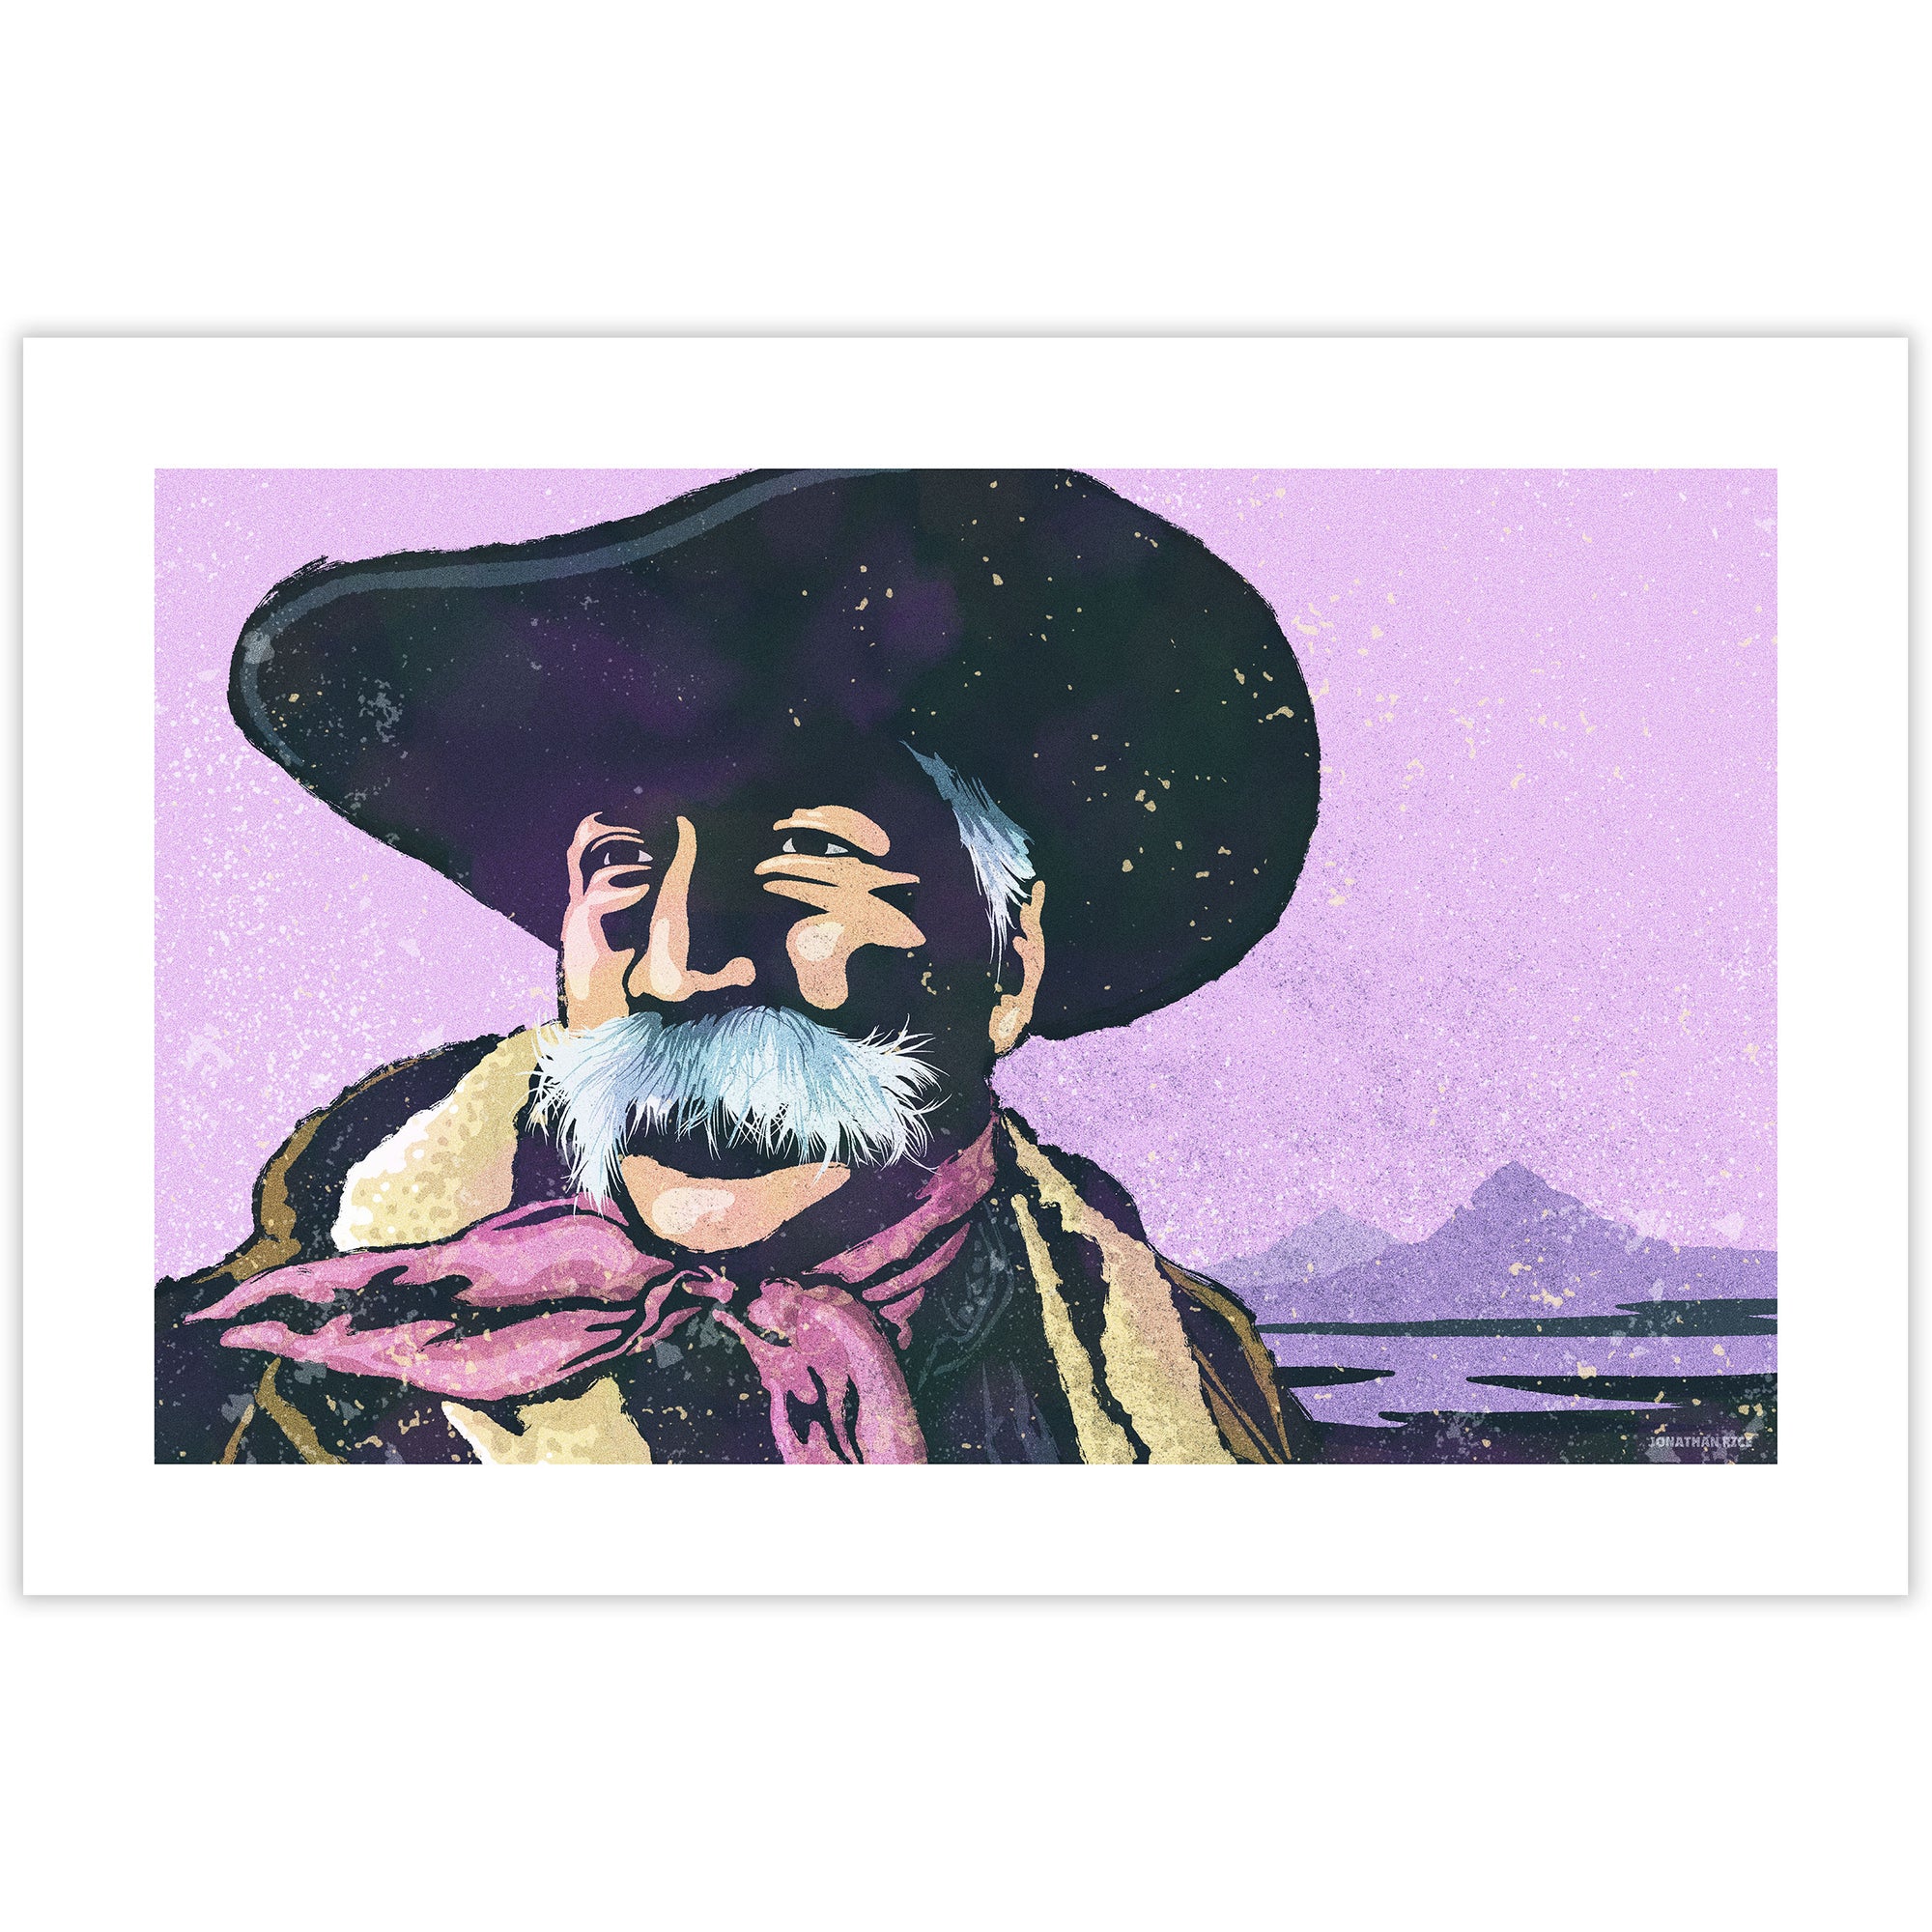 Modern style giclée art print of a cowboy on a cold winter’s day. It is brightly colored, yet has gritty texture overall. There are mountains in the background.